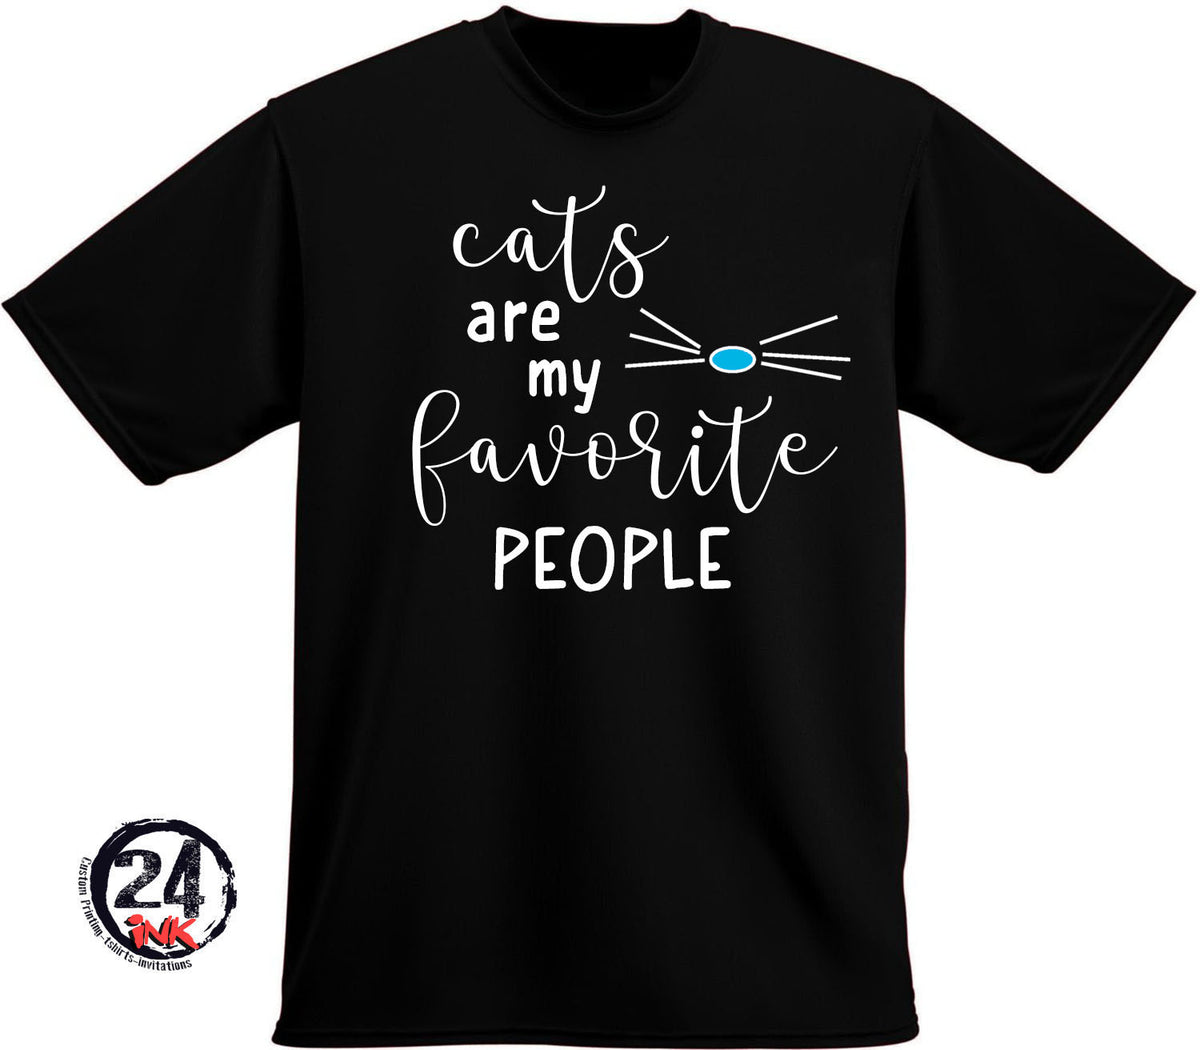 Cats are my favorite people t-shirt